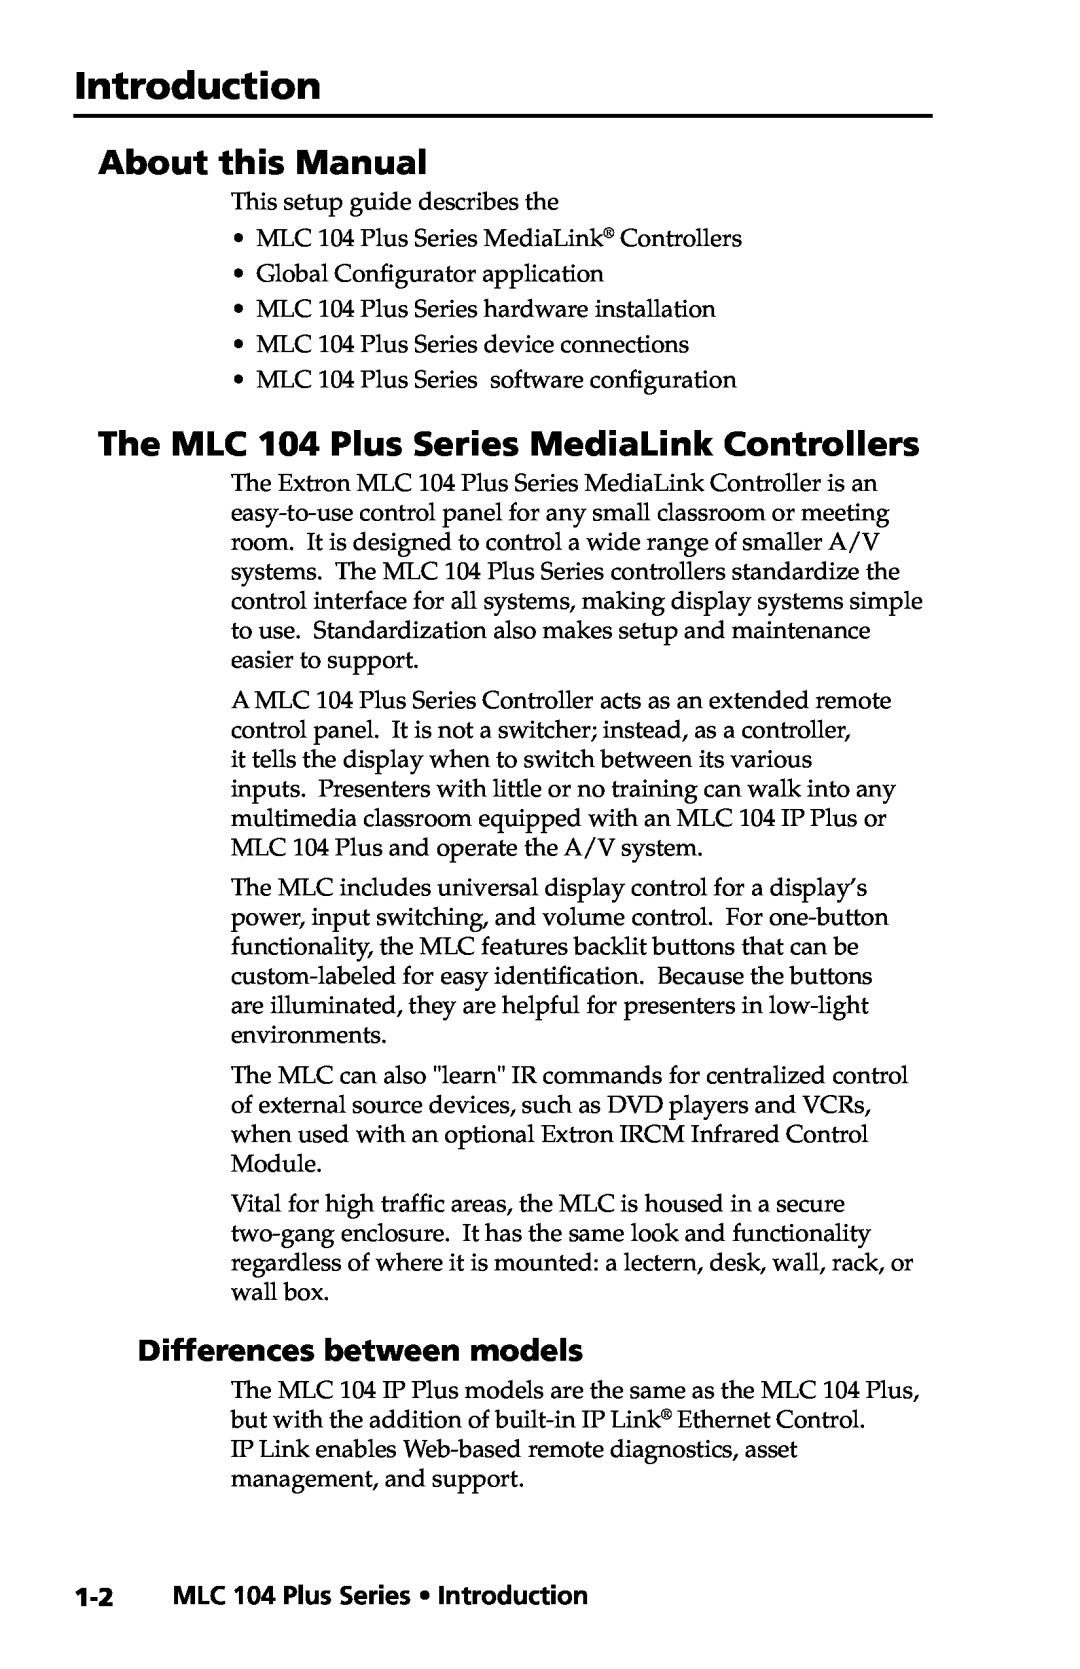 Extron electronic setup guide Introduction, About this Manual, The MLC 104 Plus Series MediaLink Controllers 